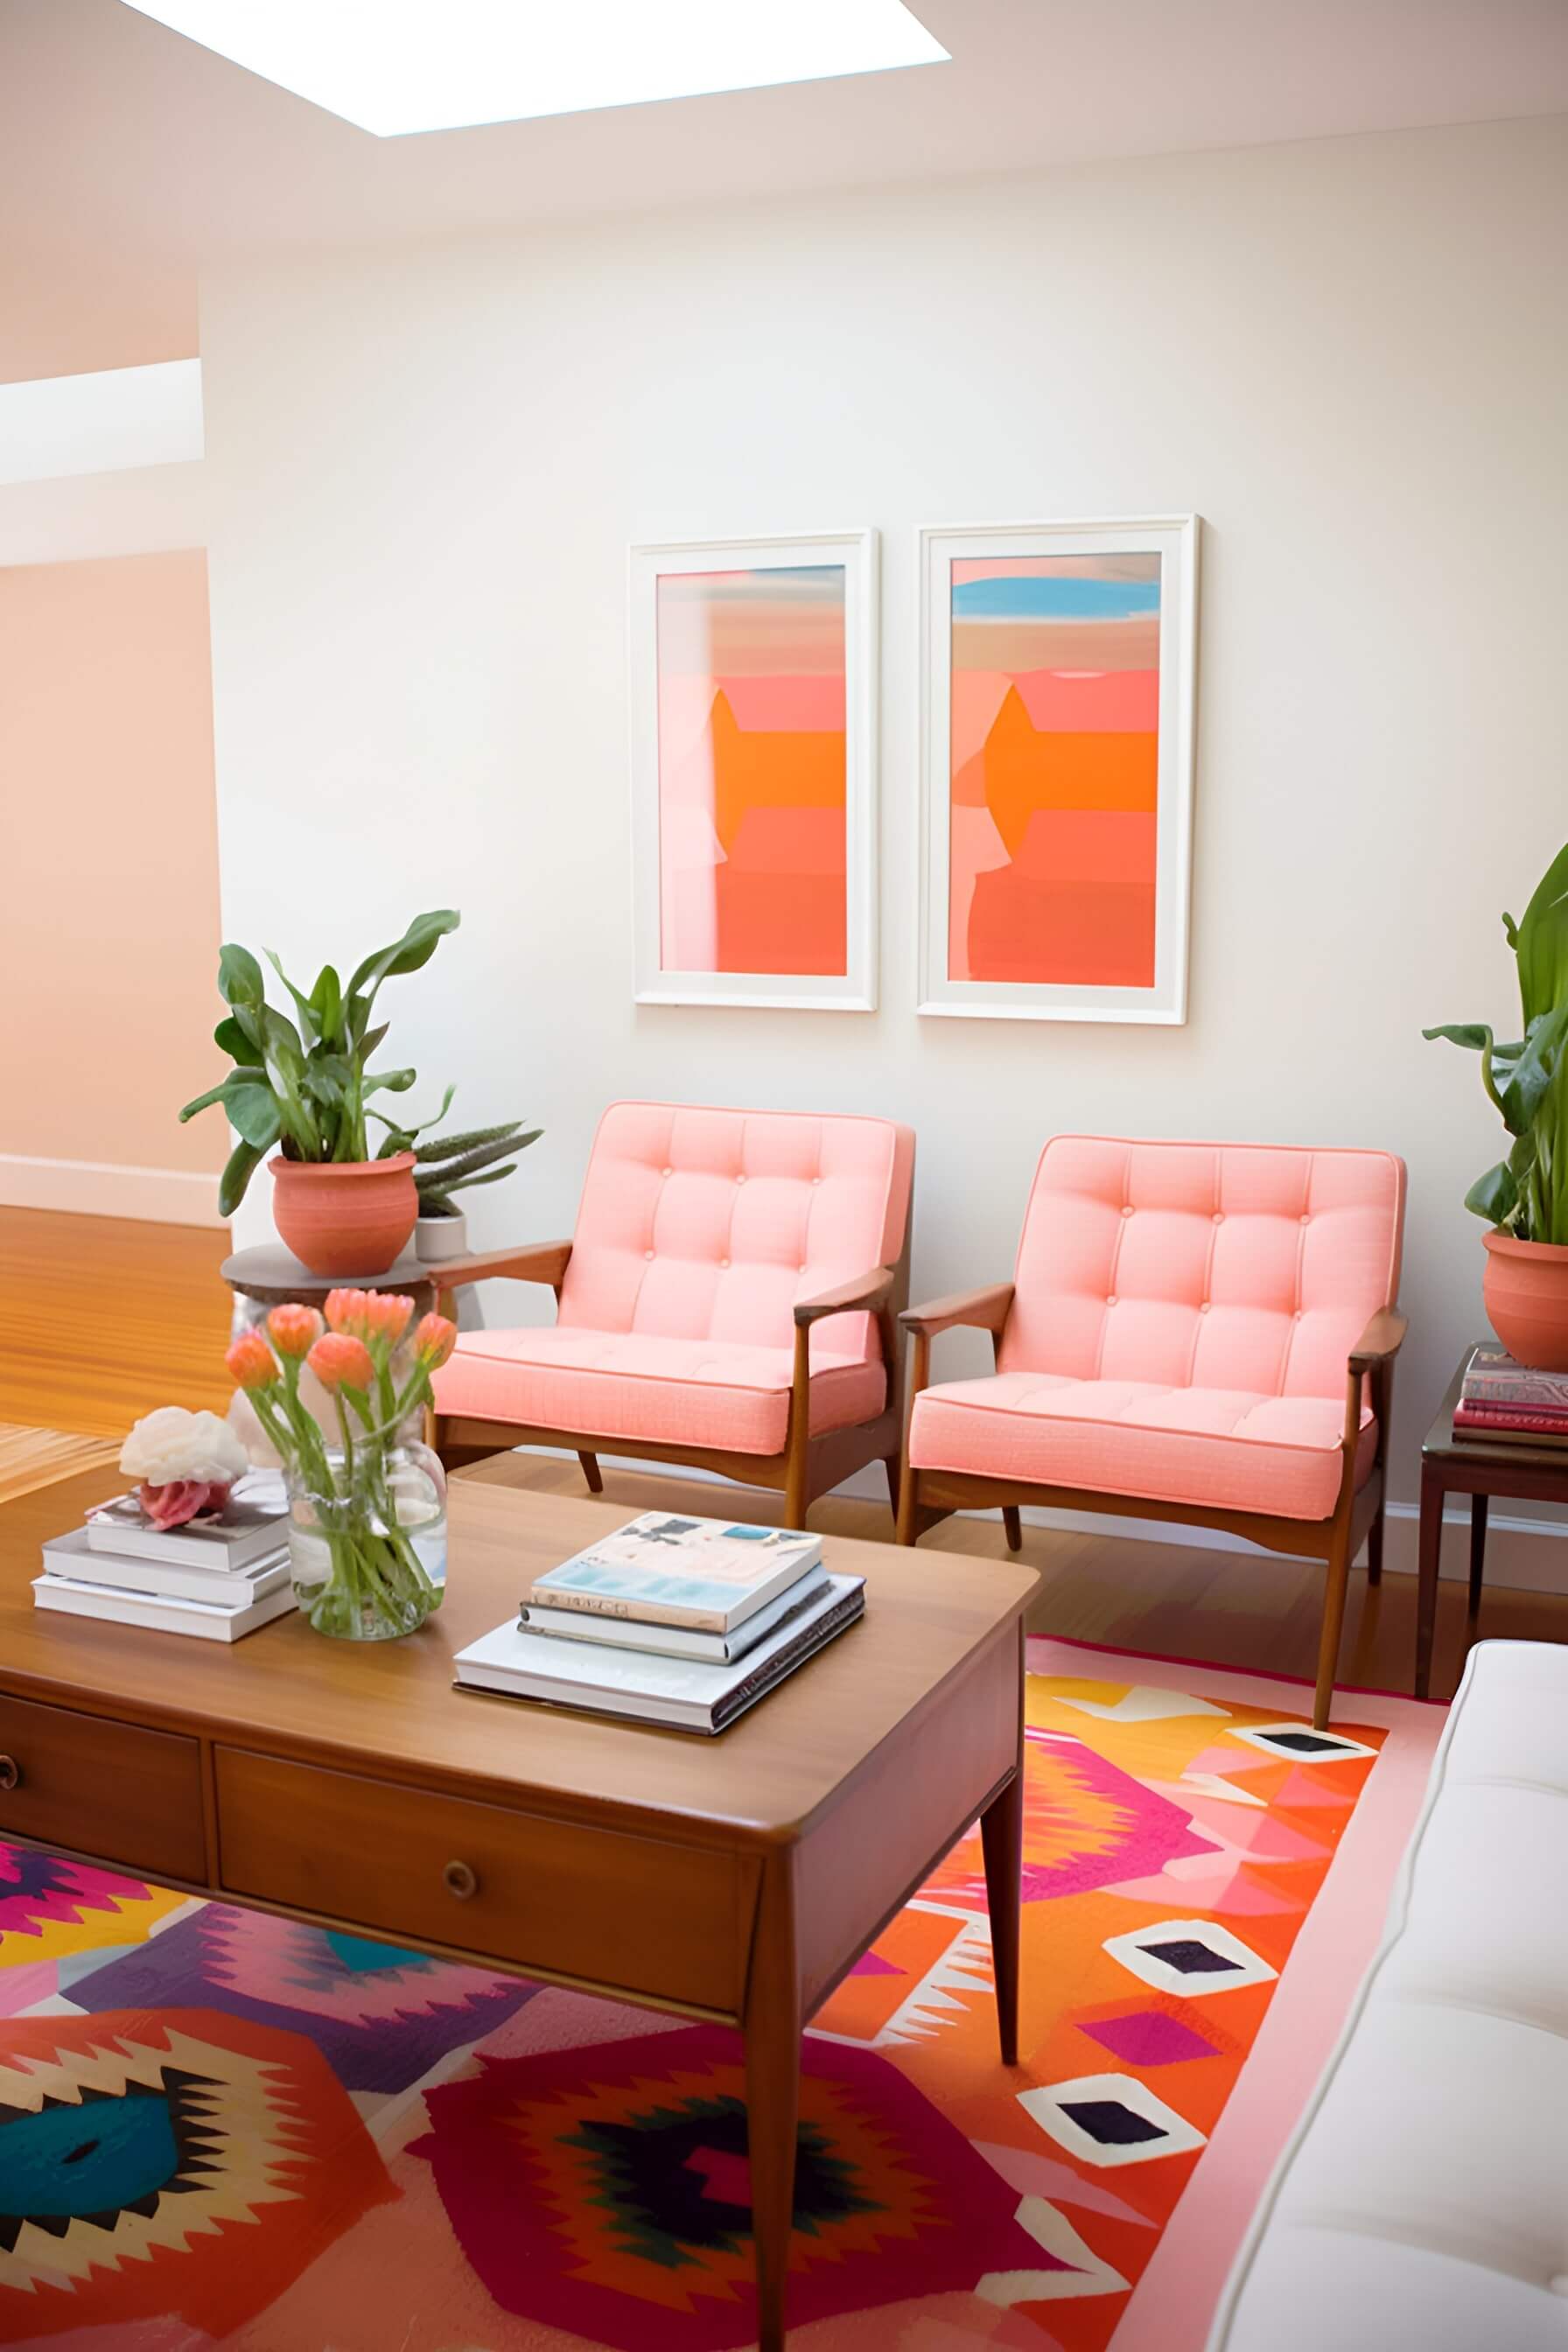 a mid-century modern living room with pink armchairs, abstract art, abstract patterned rug, wooden coffee table